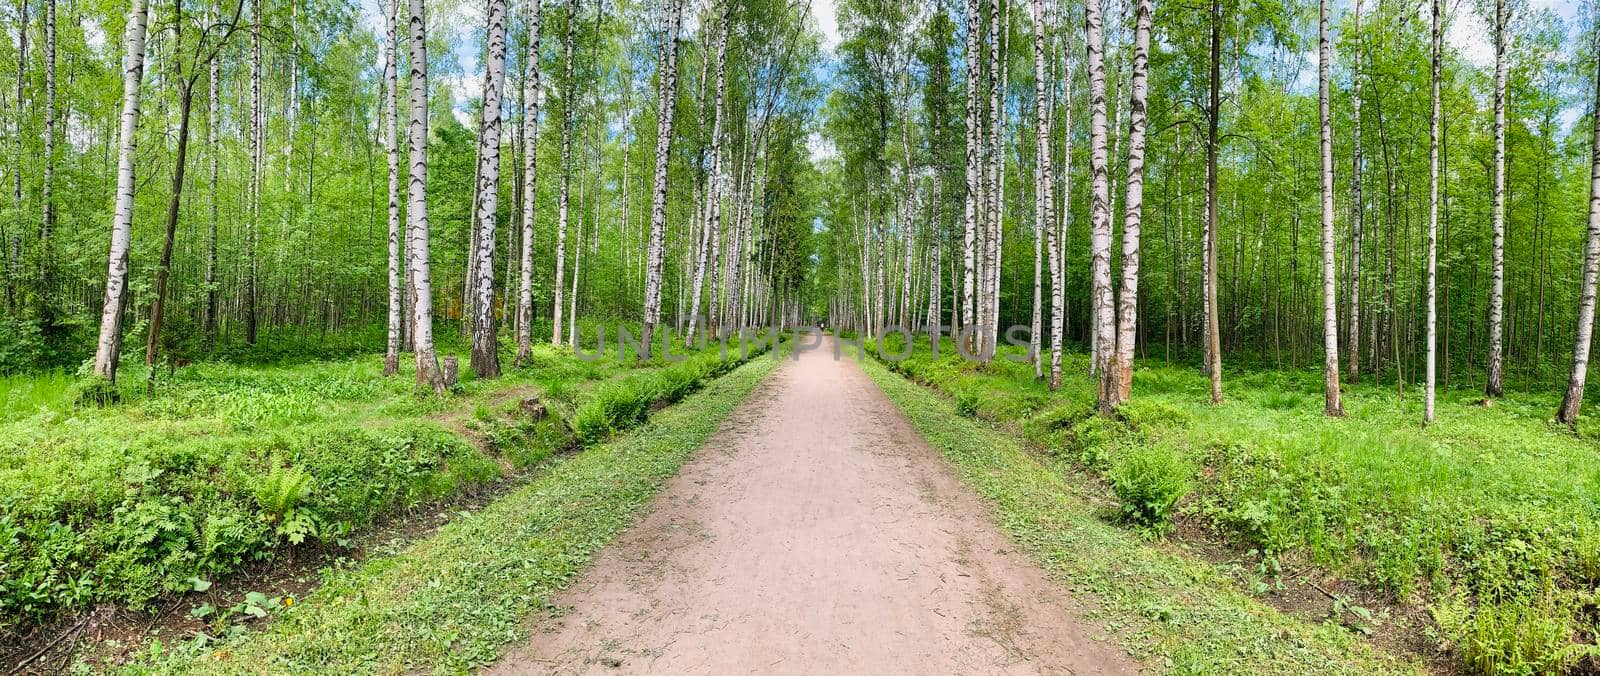 Panoramic image of the straight path in the forest among birch trunks in sunny weather, sun rays break through the foliage, nobody by vladimirdrozdin